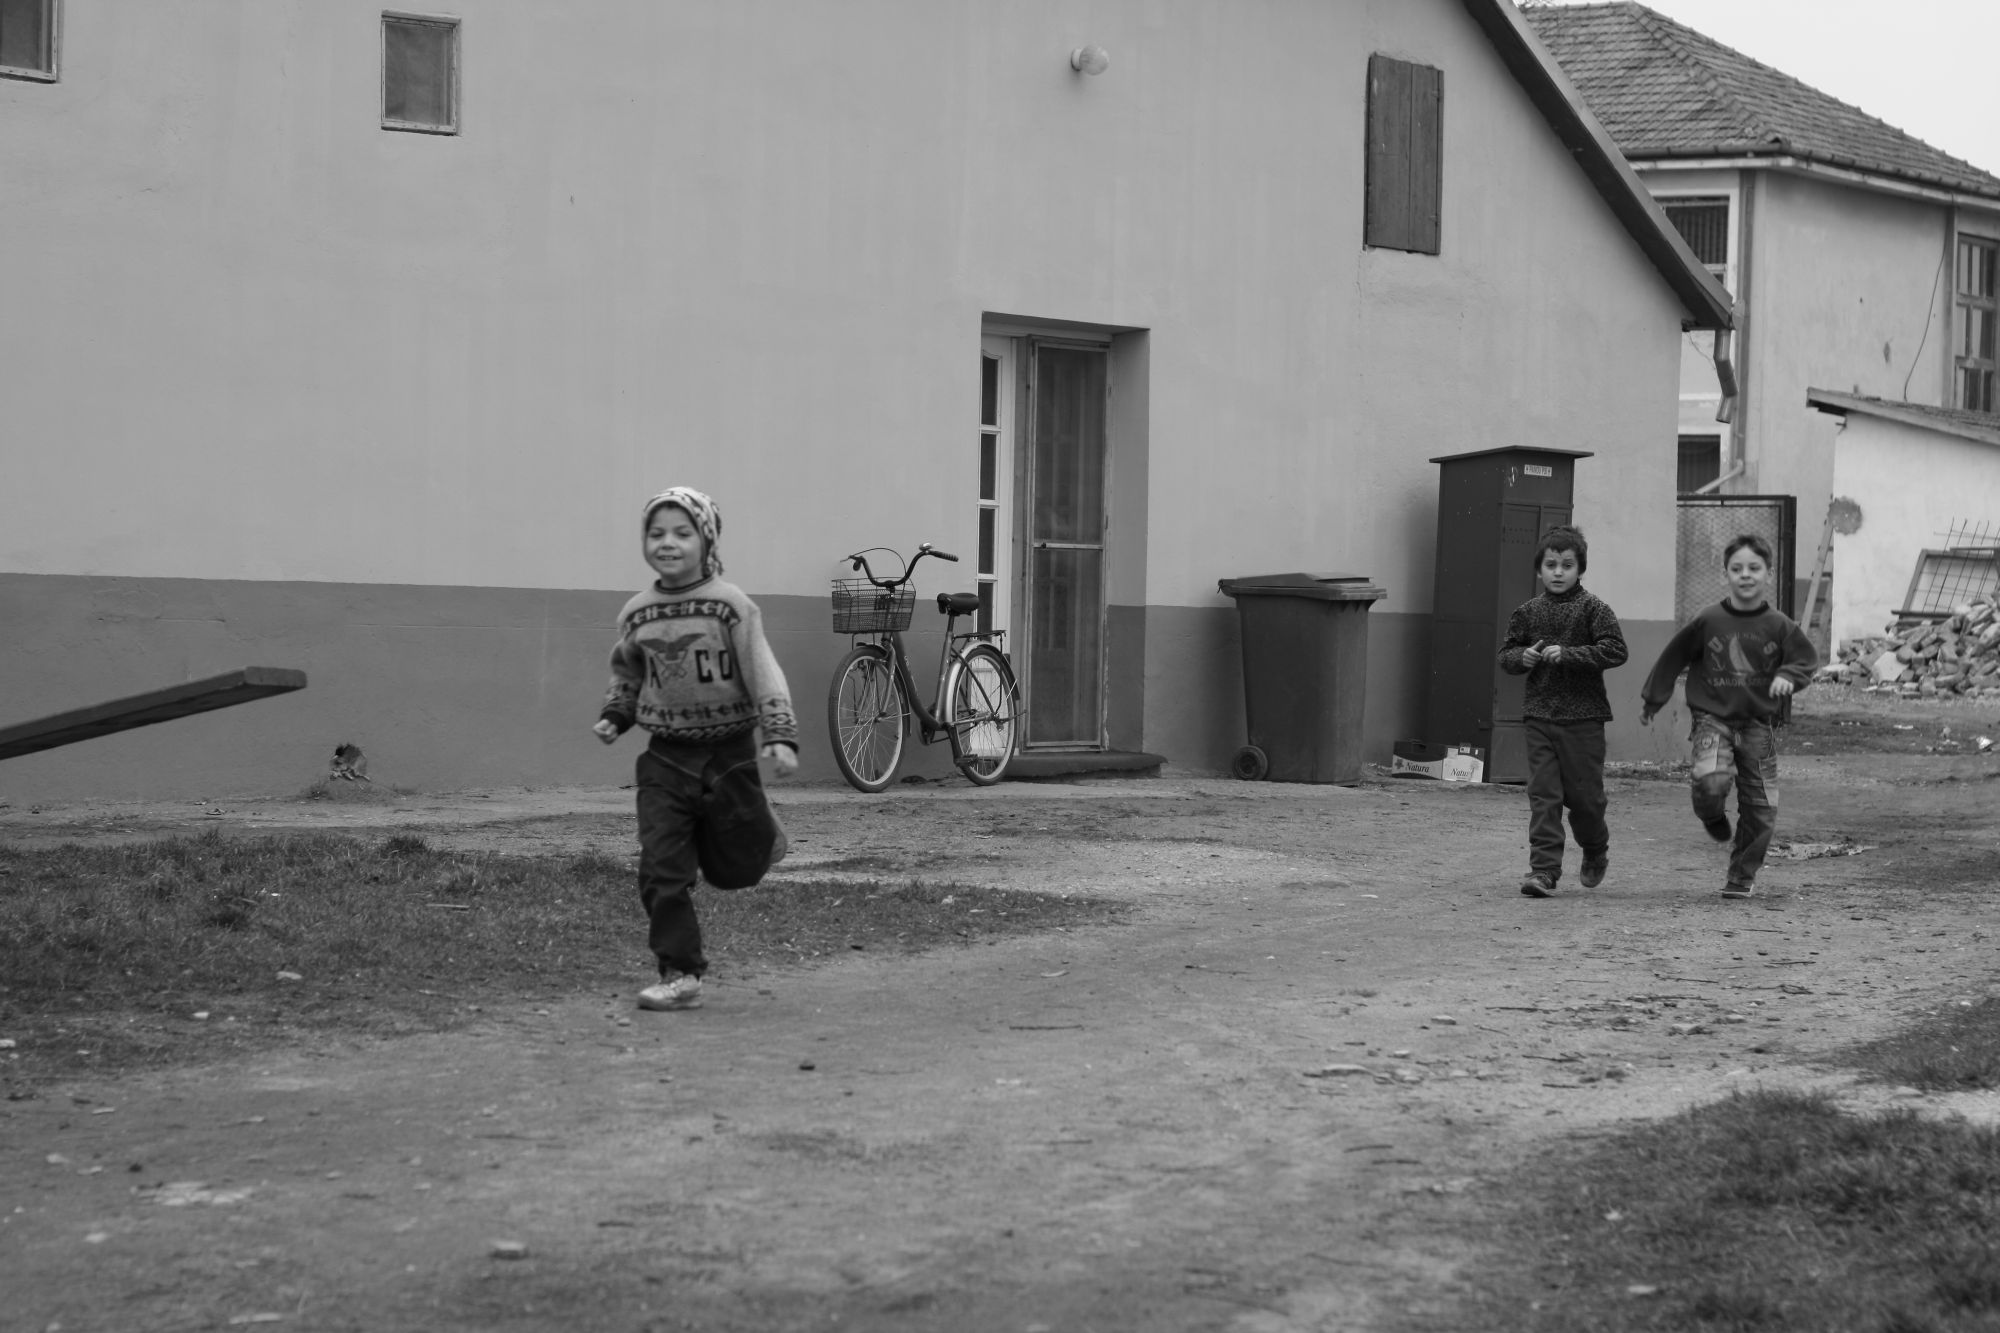 Black and white photo from the streets of Romanian villages